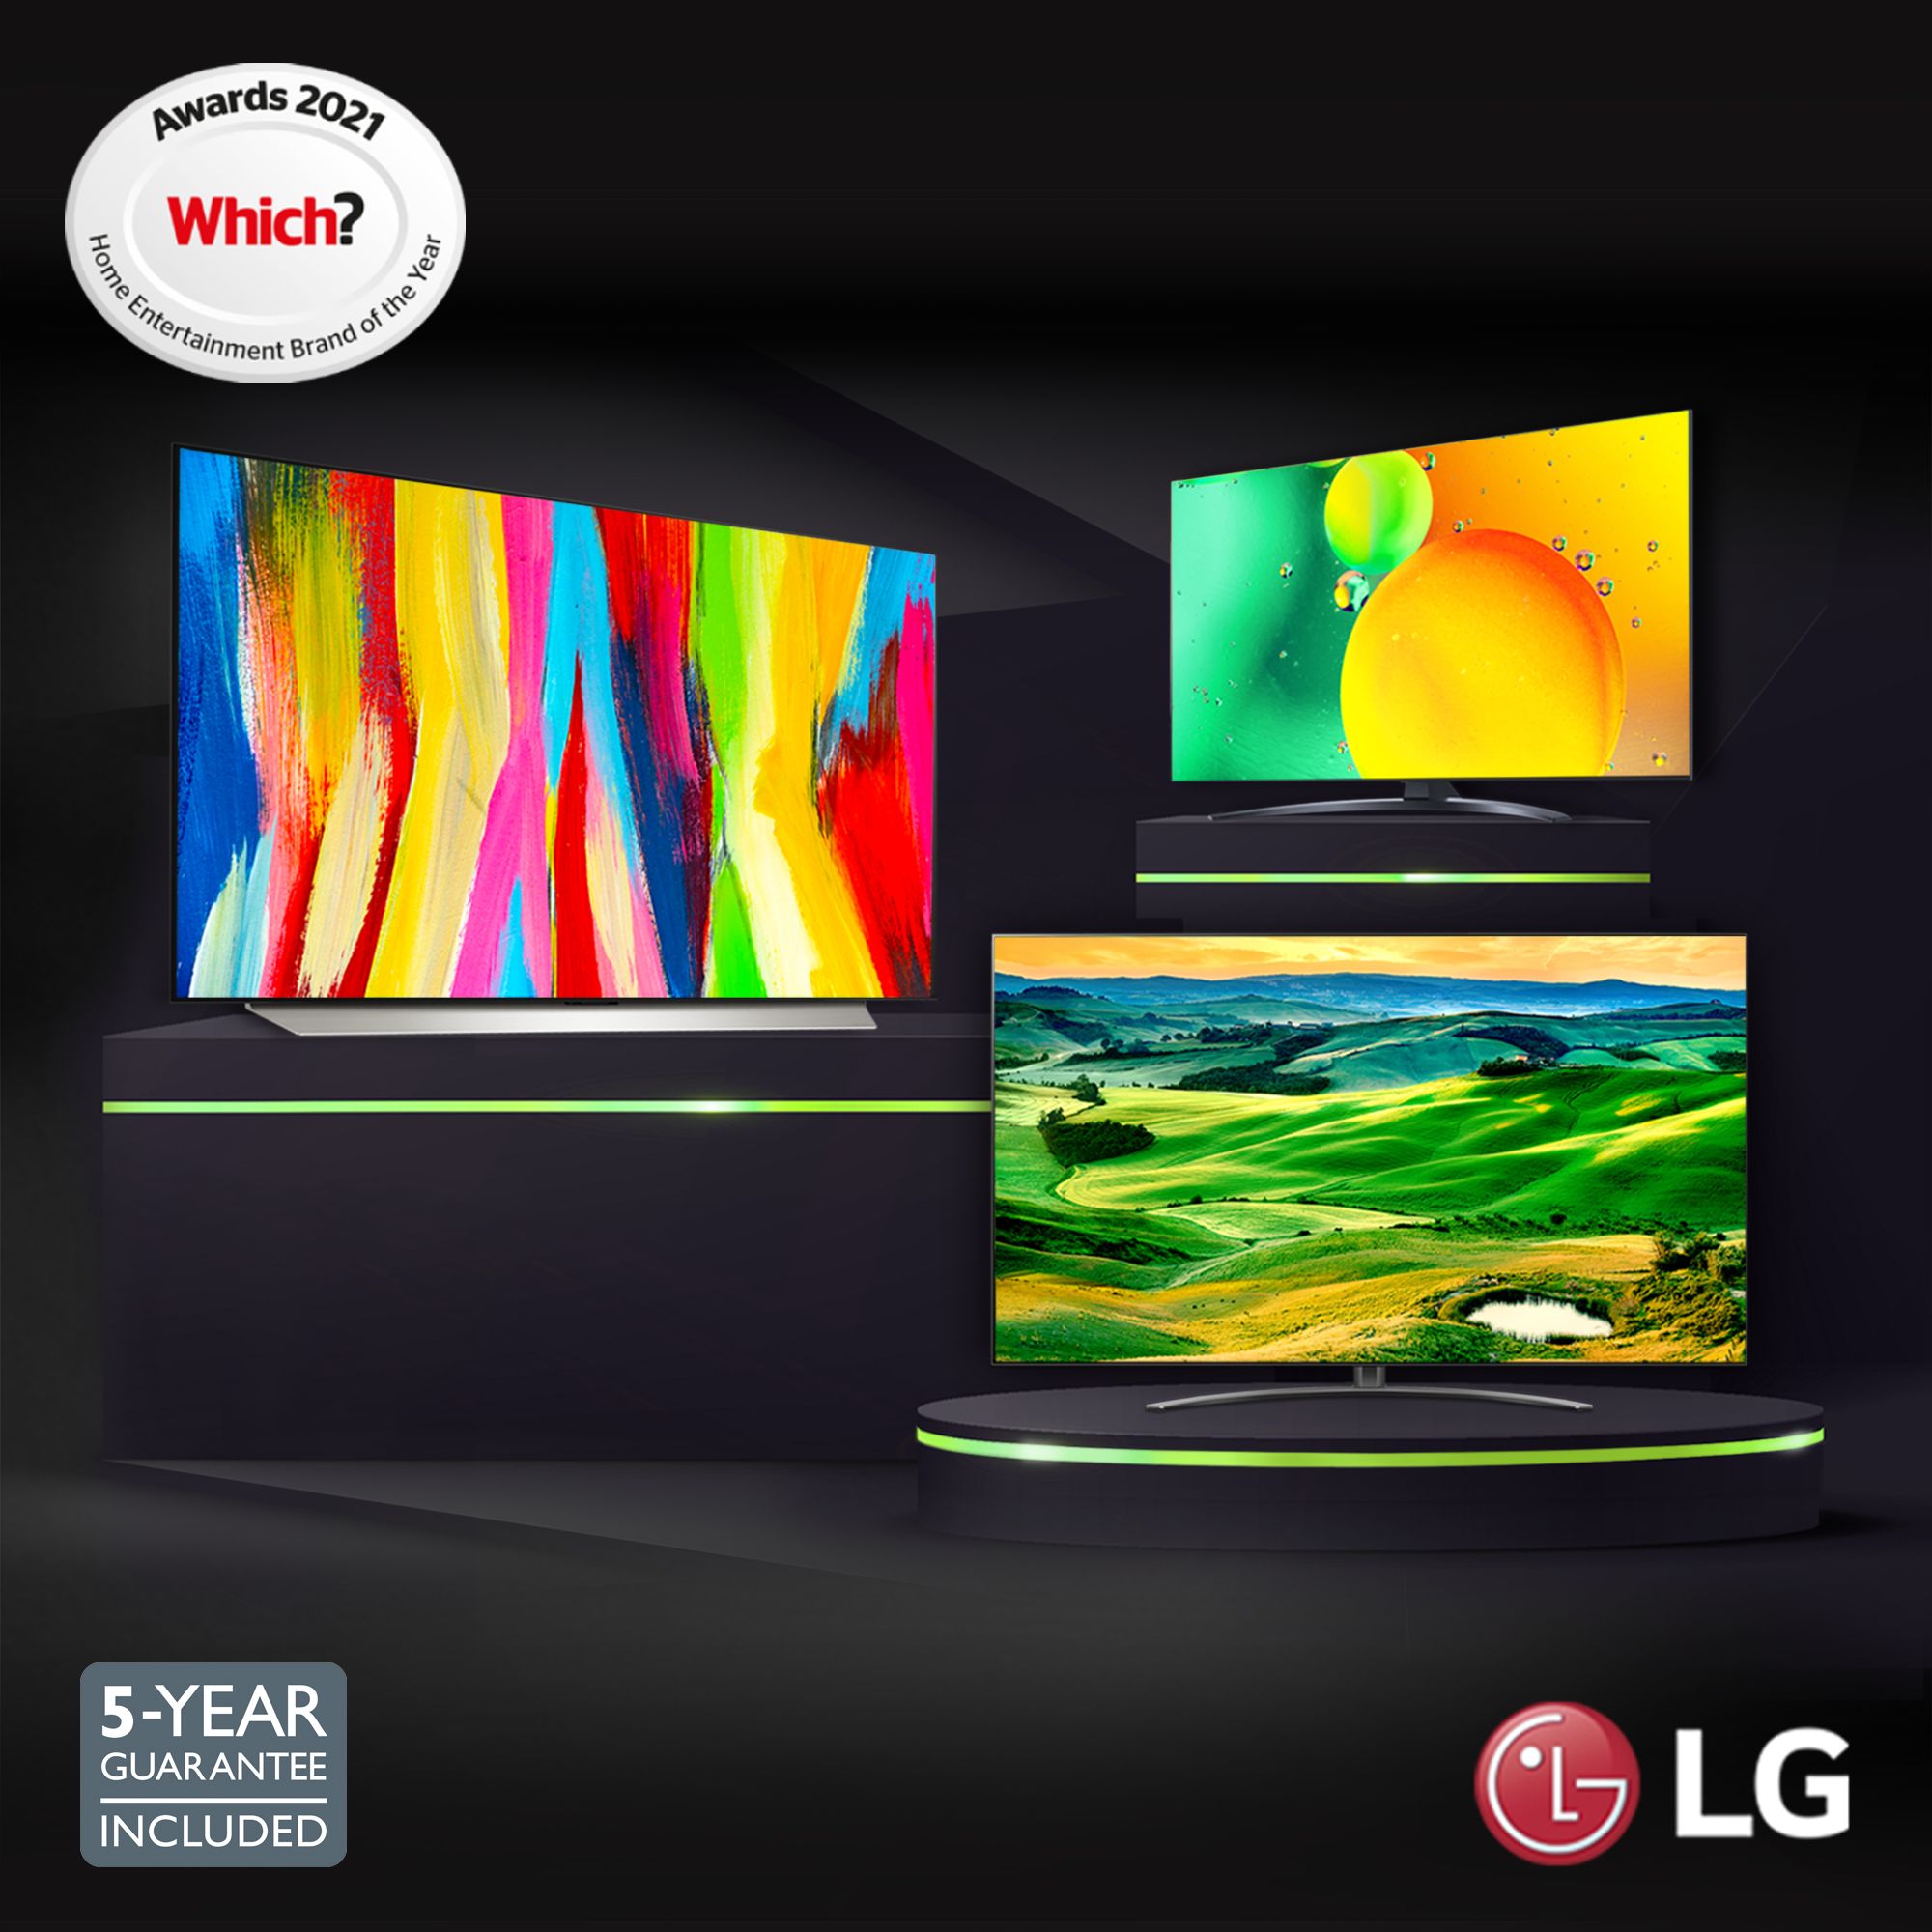 Up to £300 cashback on selected 2022 LG TVs